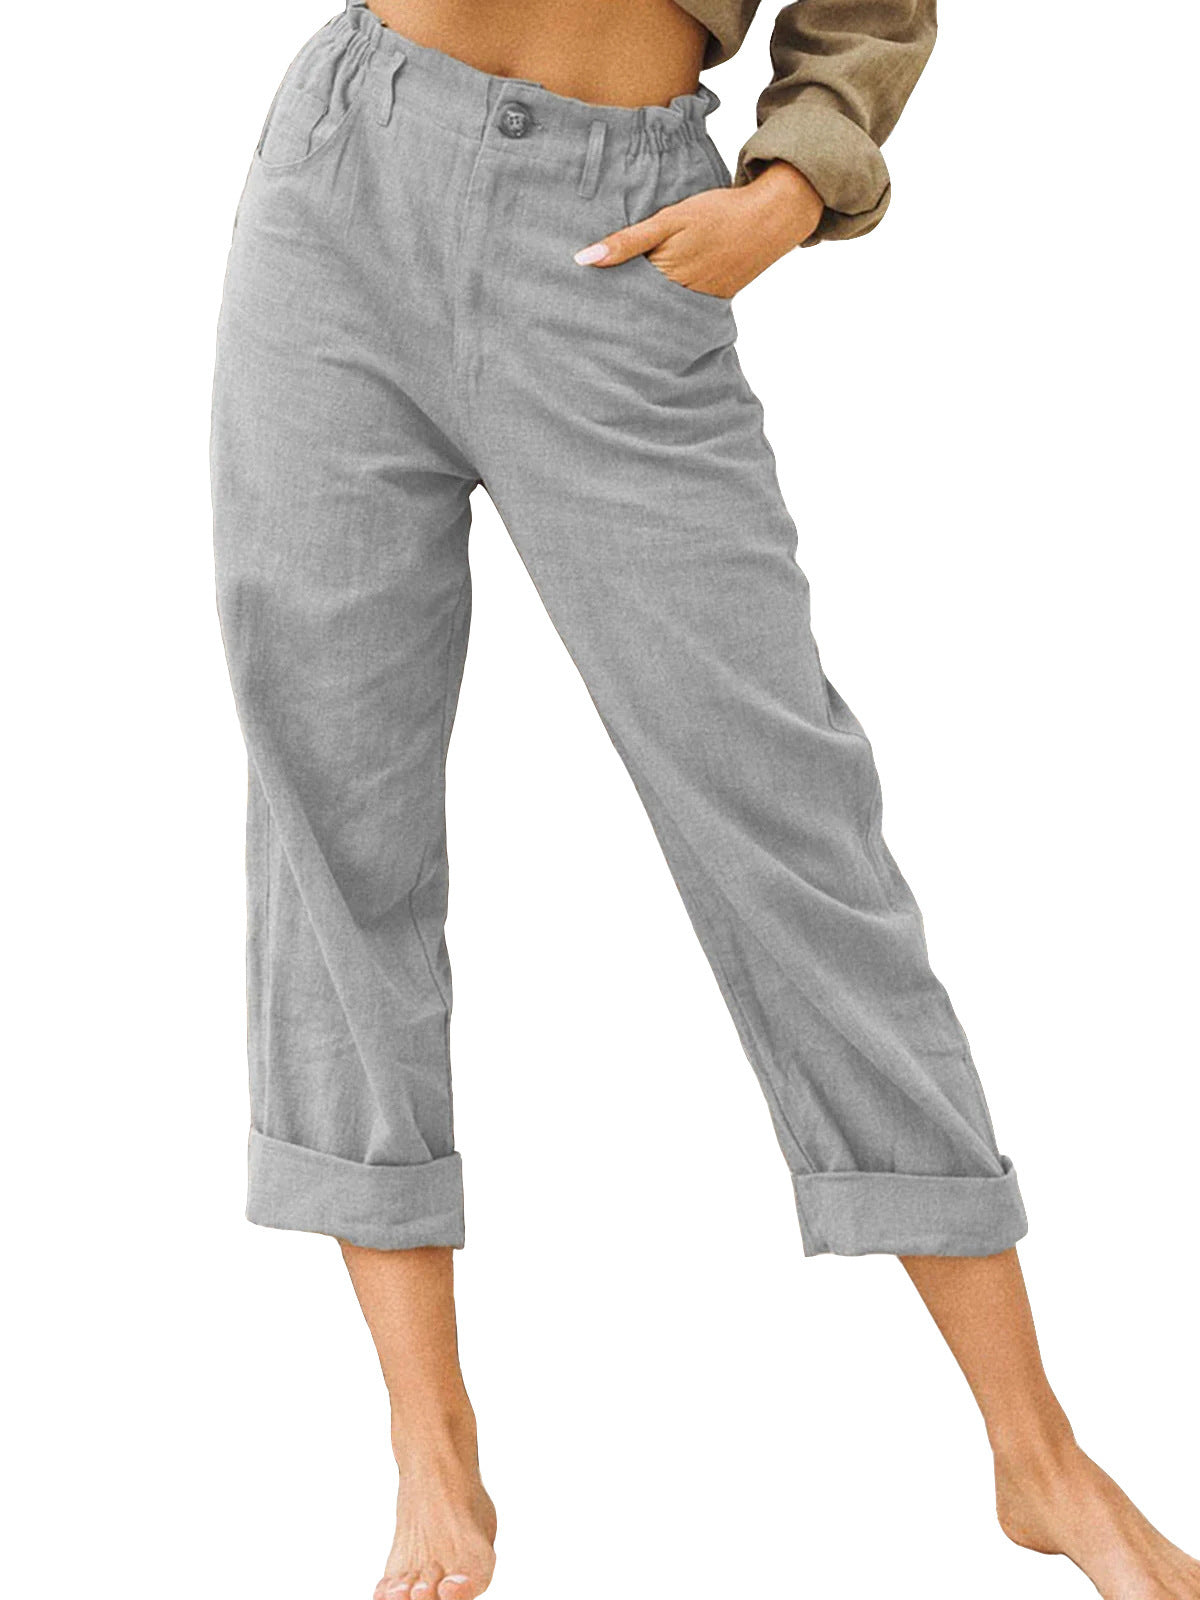 Women's Cotton Linen Patchwork Pants with Drawstring Waist and Loose Casual Fit